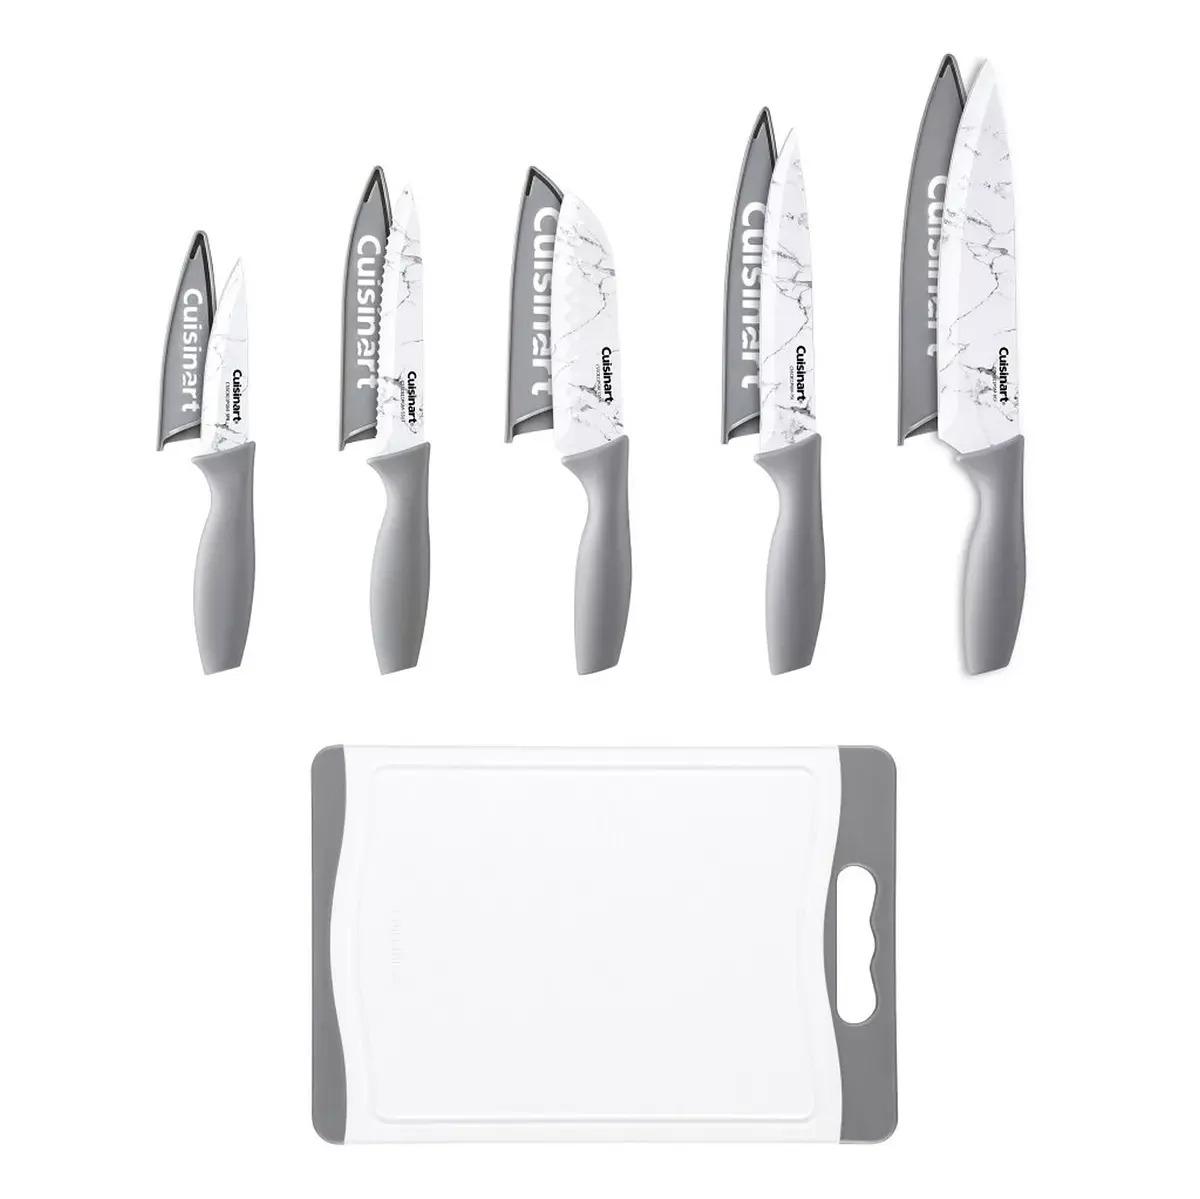 Cuisinart Stainless Steel Ceramic-Coated Knife and Cutting Board Set for $17.16